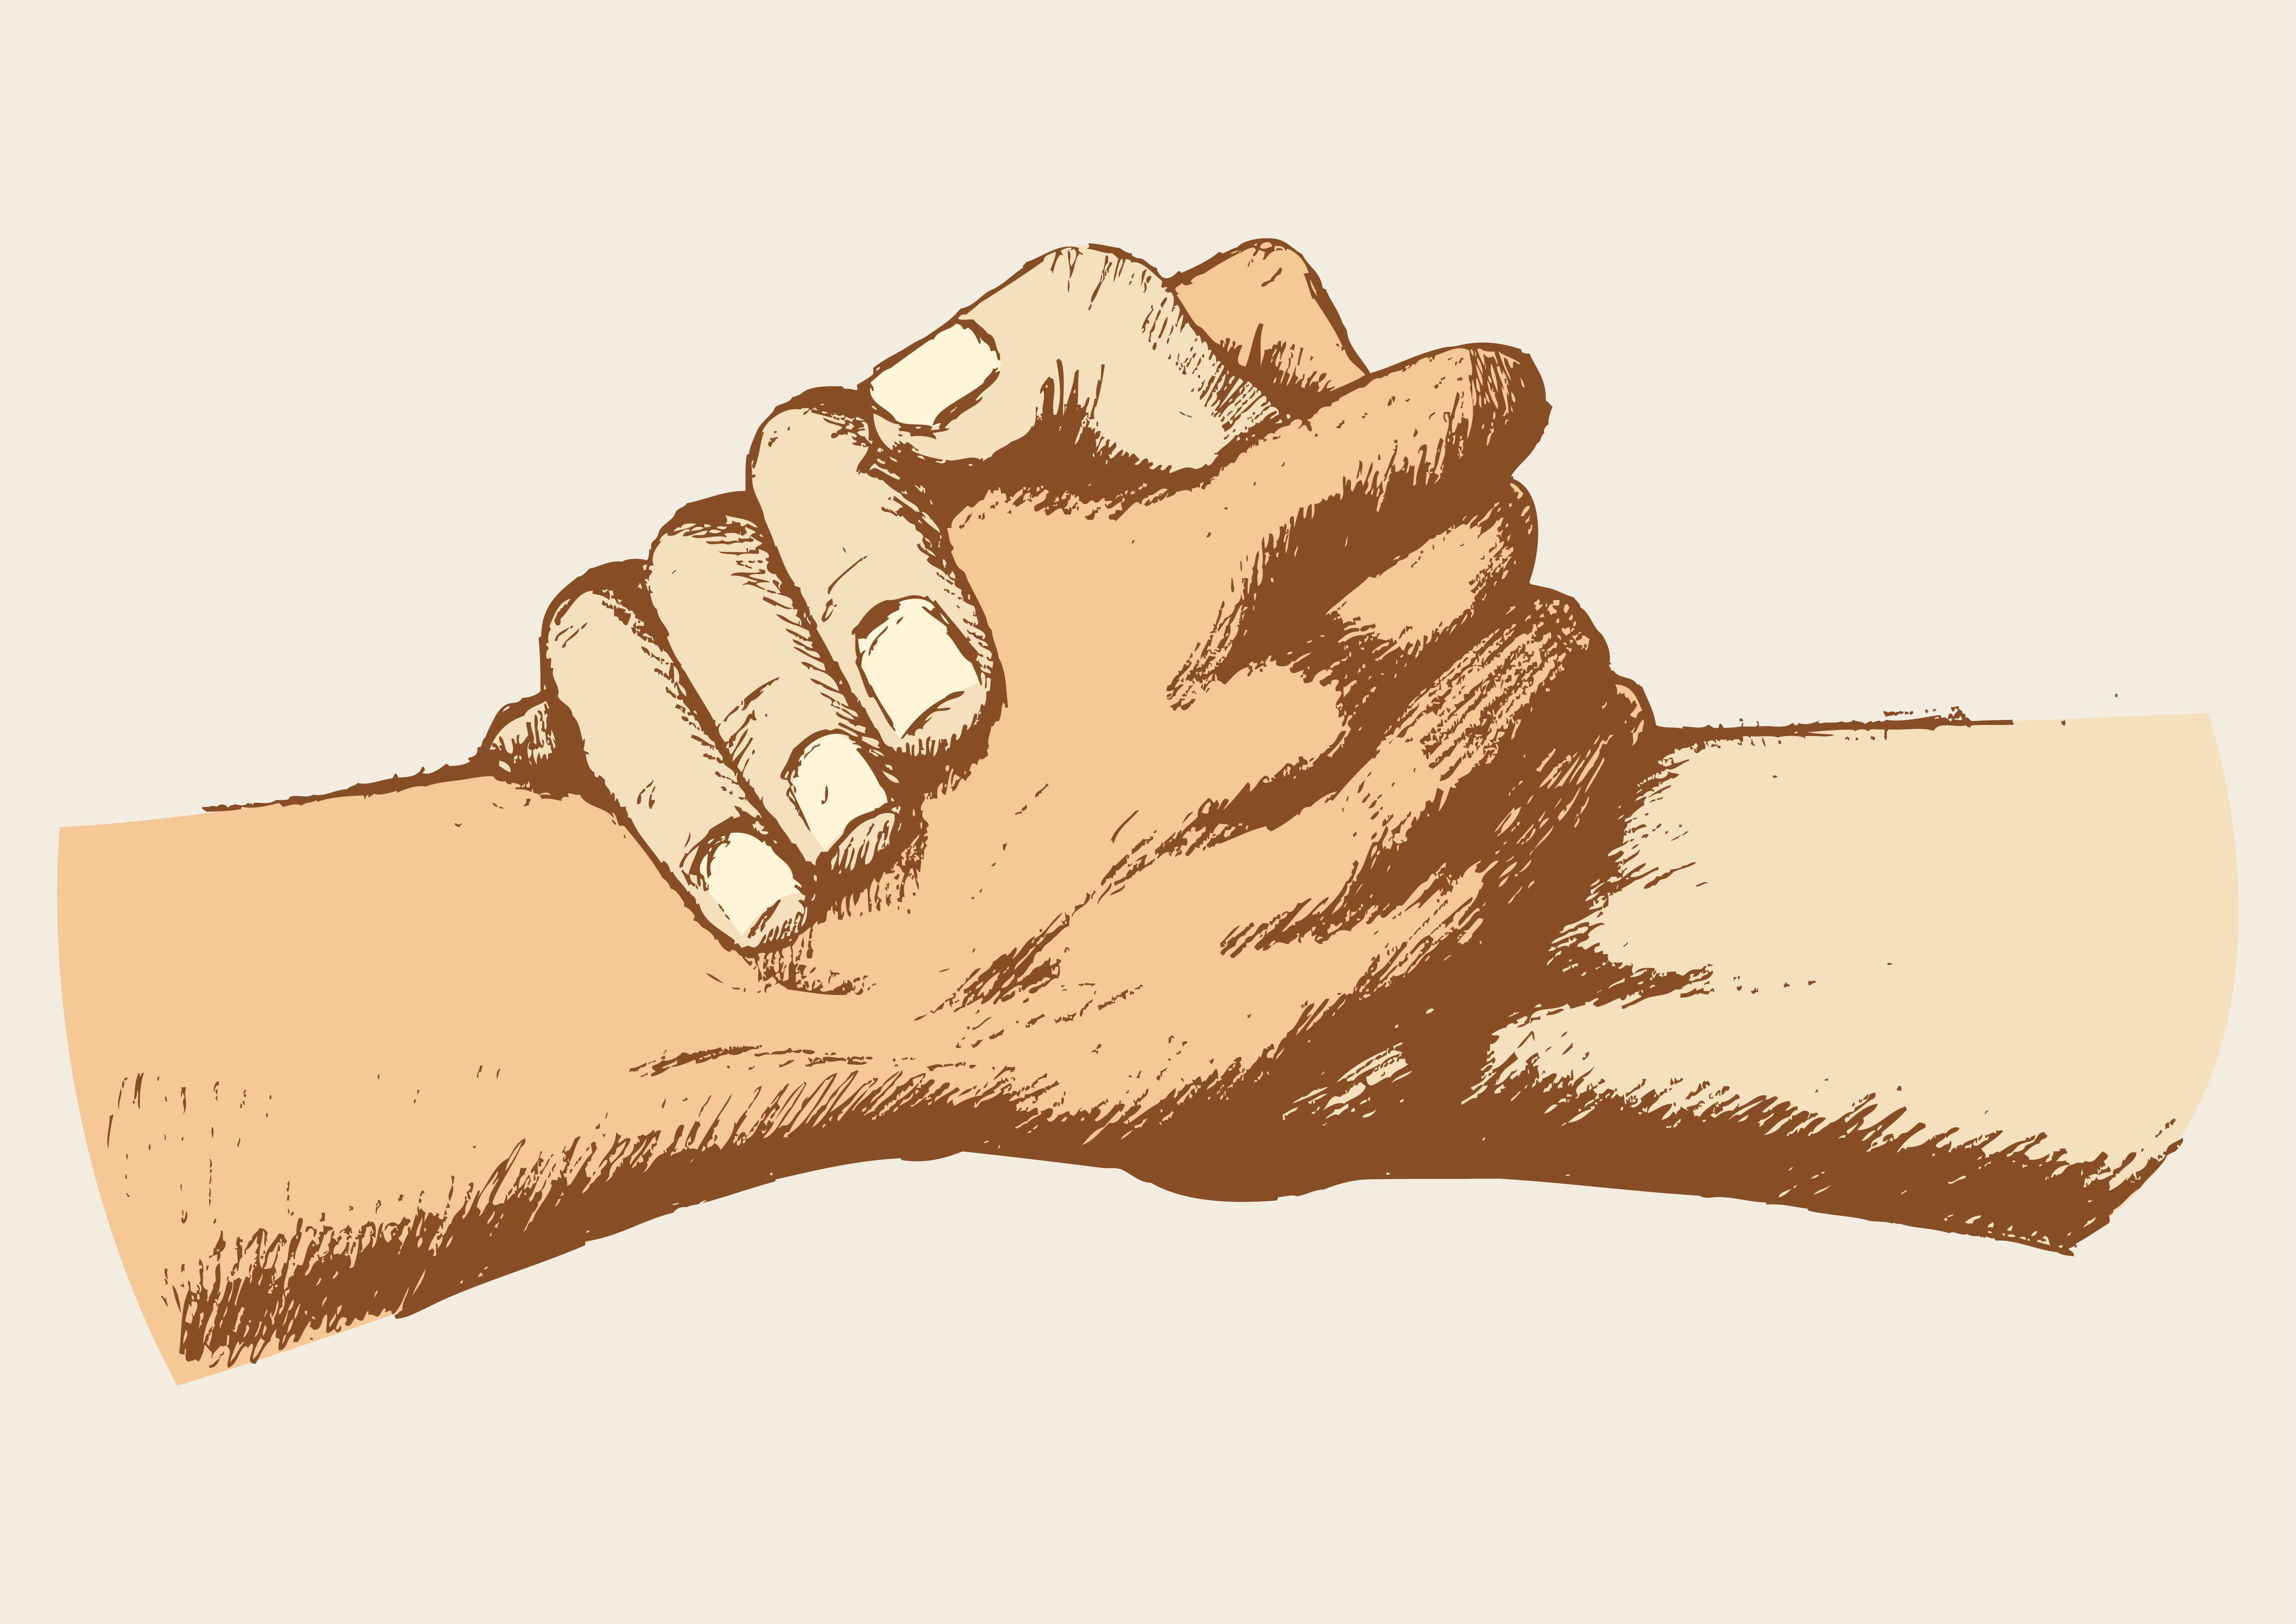 Sketch illustration of two hands holding each other strongly